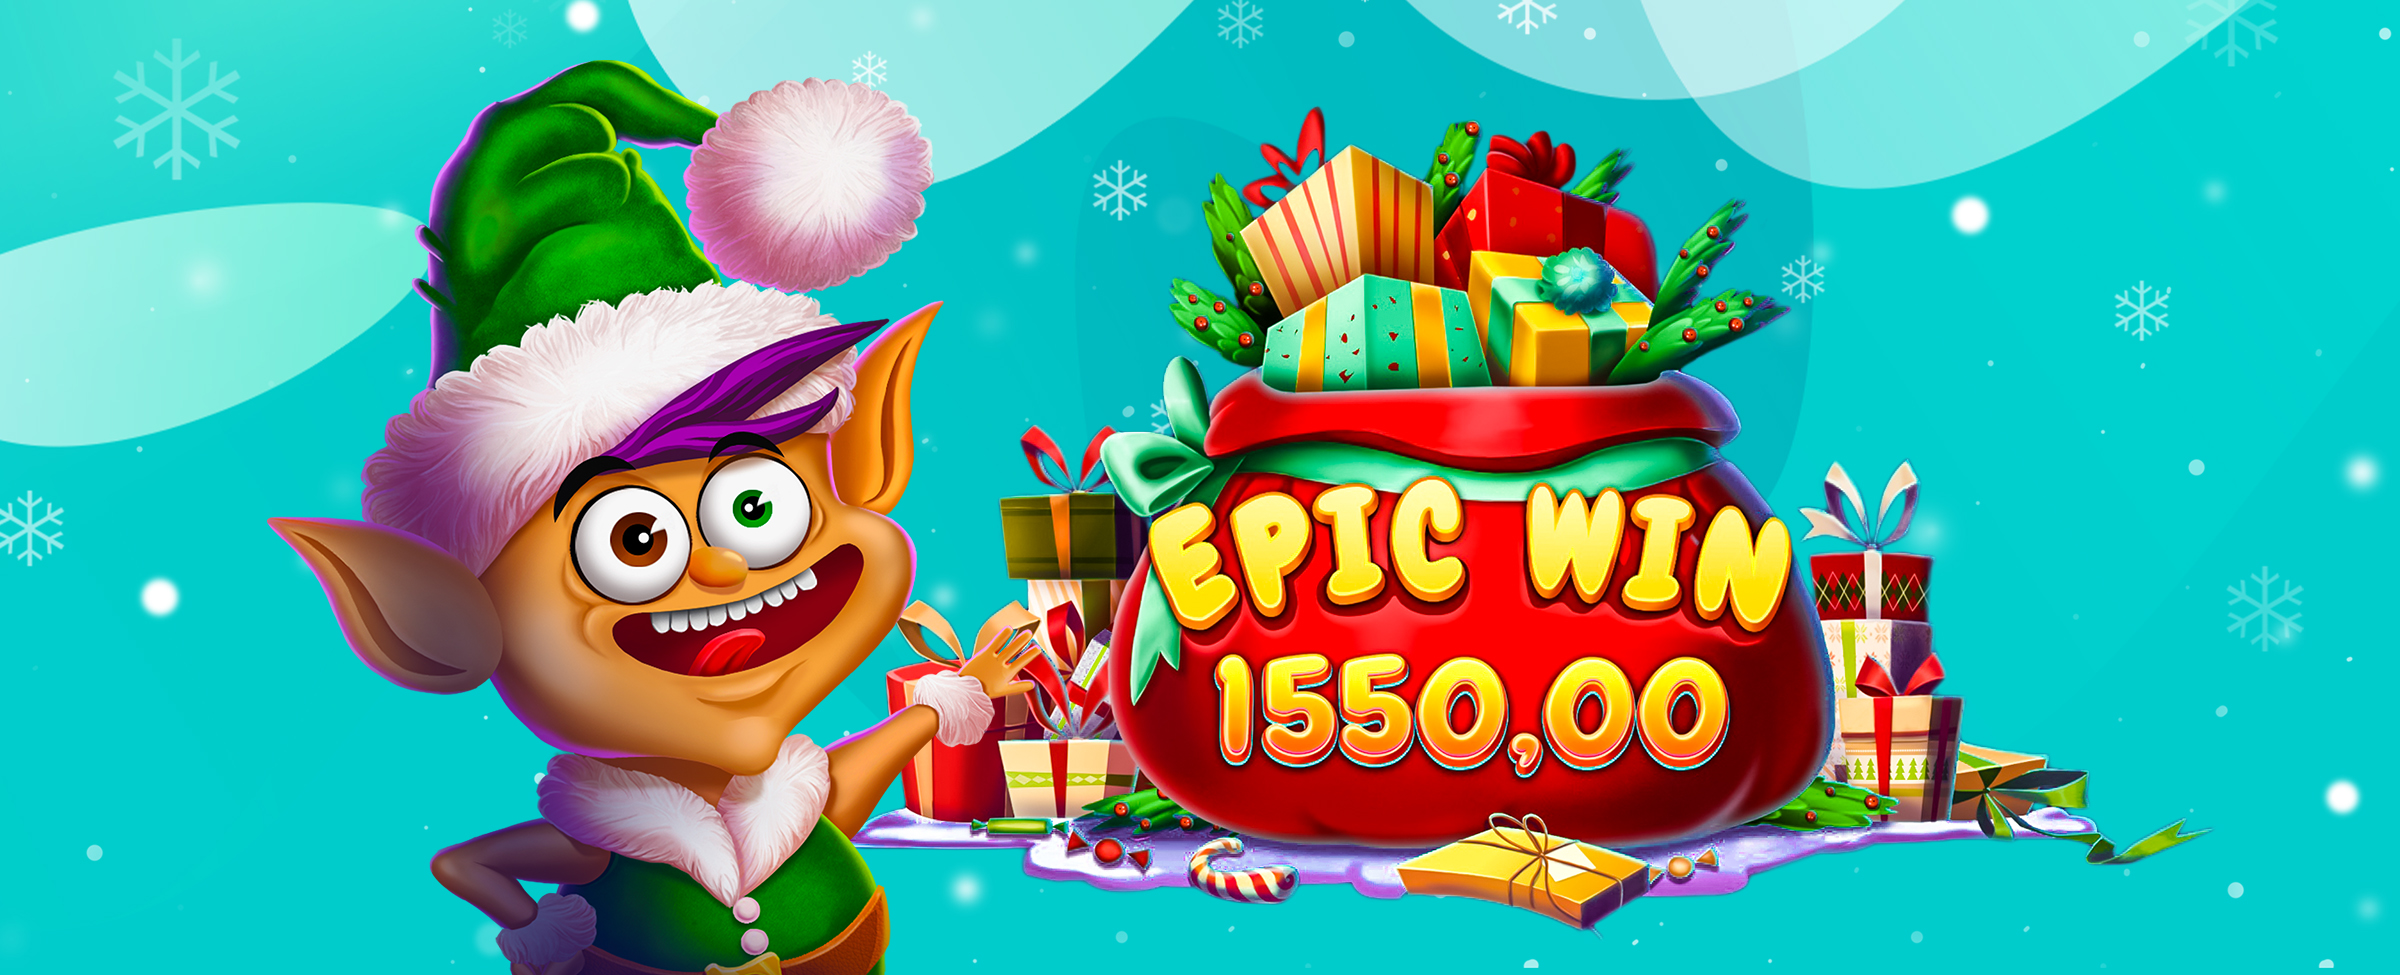 An animated elf wearing a green and purple Santa hat pointing at an oversized red sack full of gifts, with the words “epic win 1555,00” overlaid.